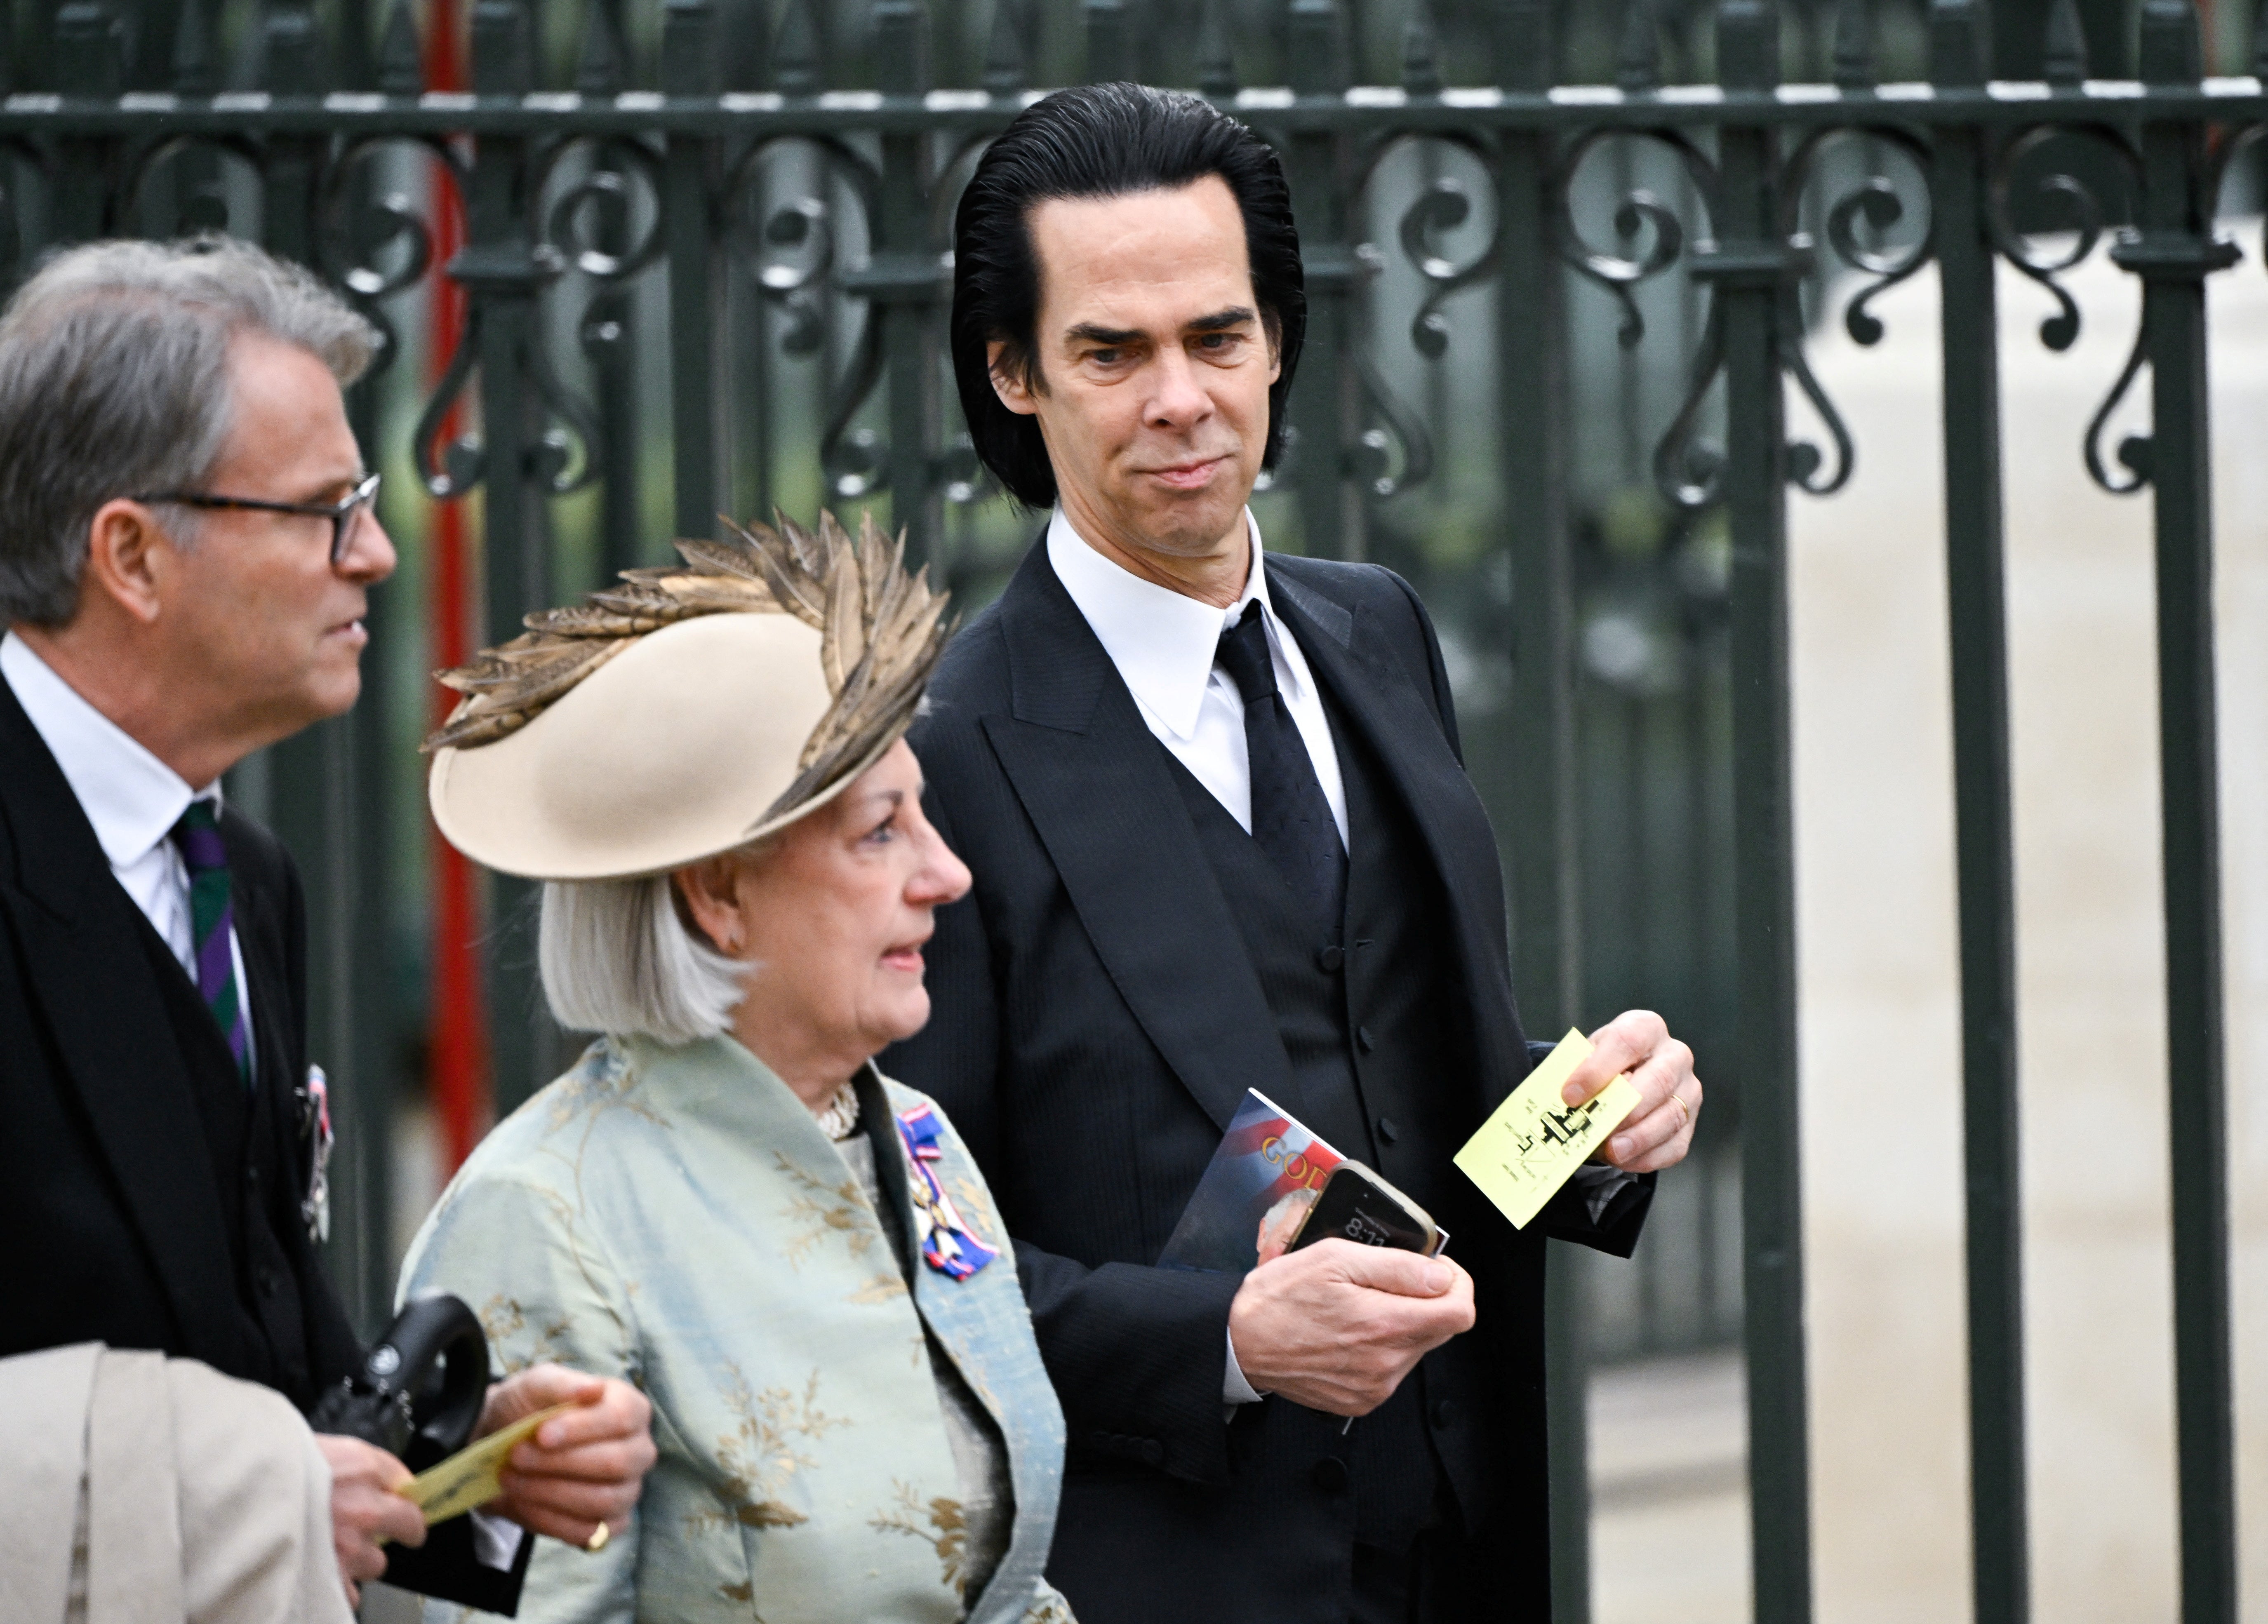 Nick Cave makes his way to the church